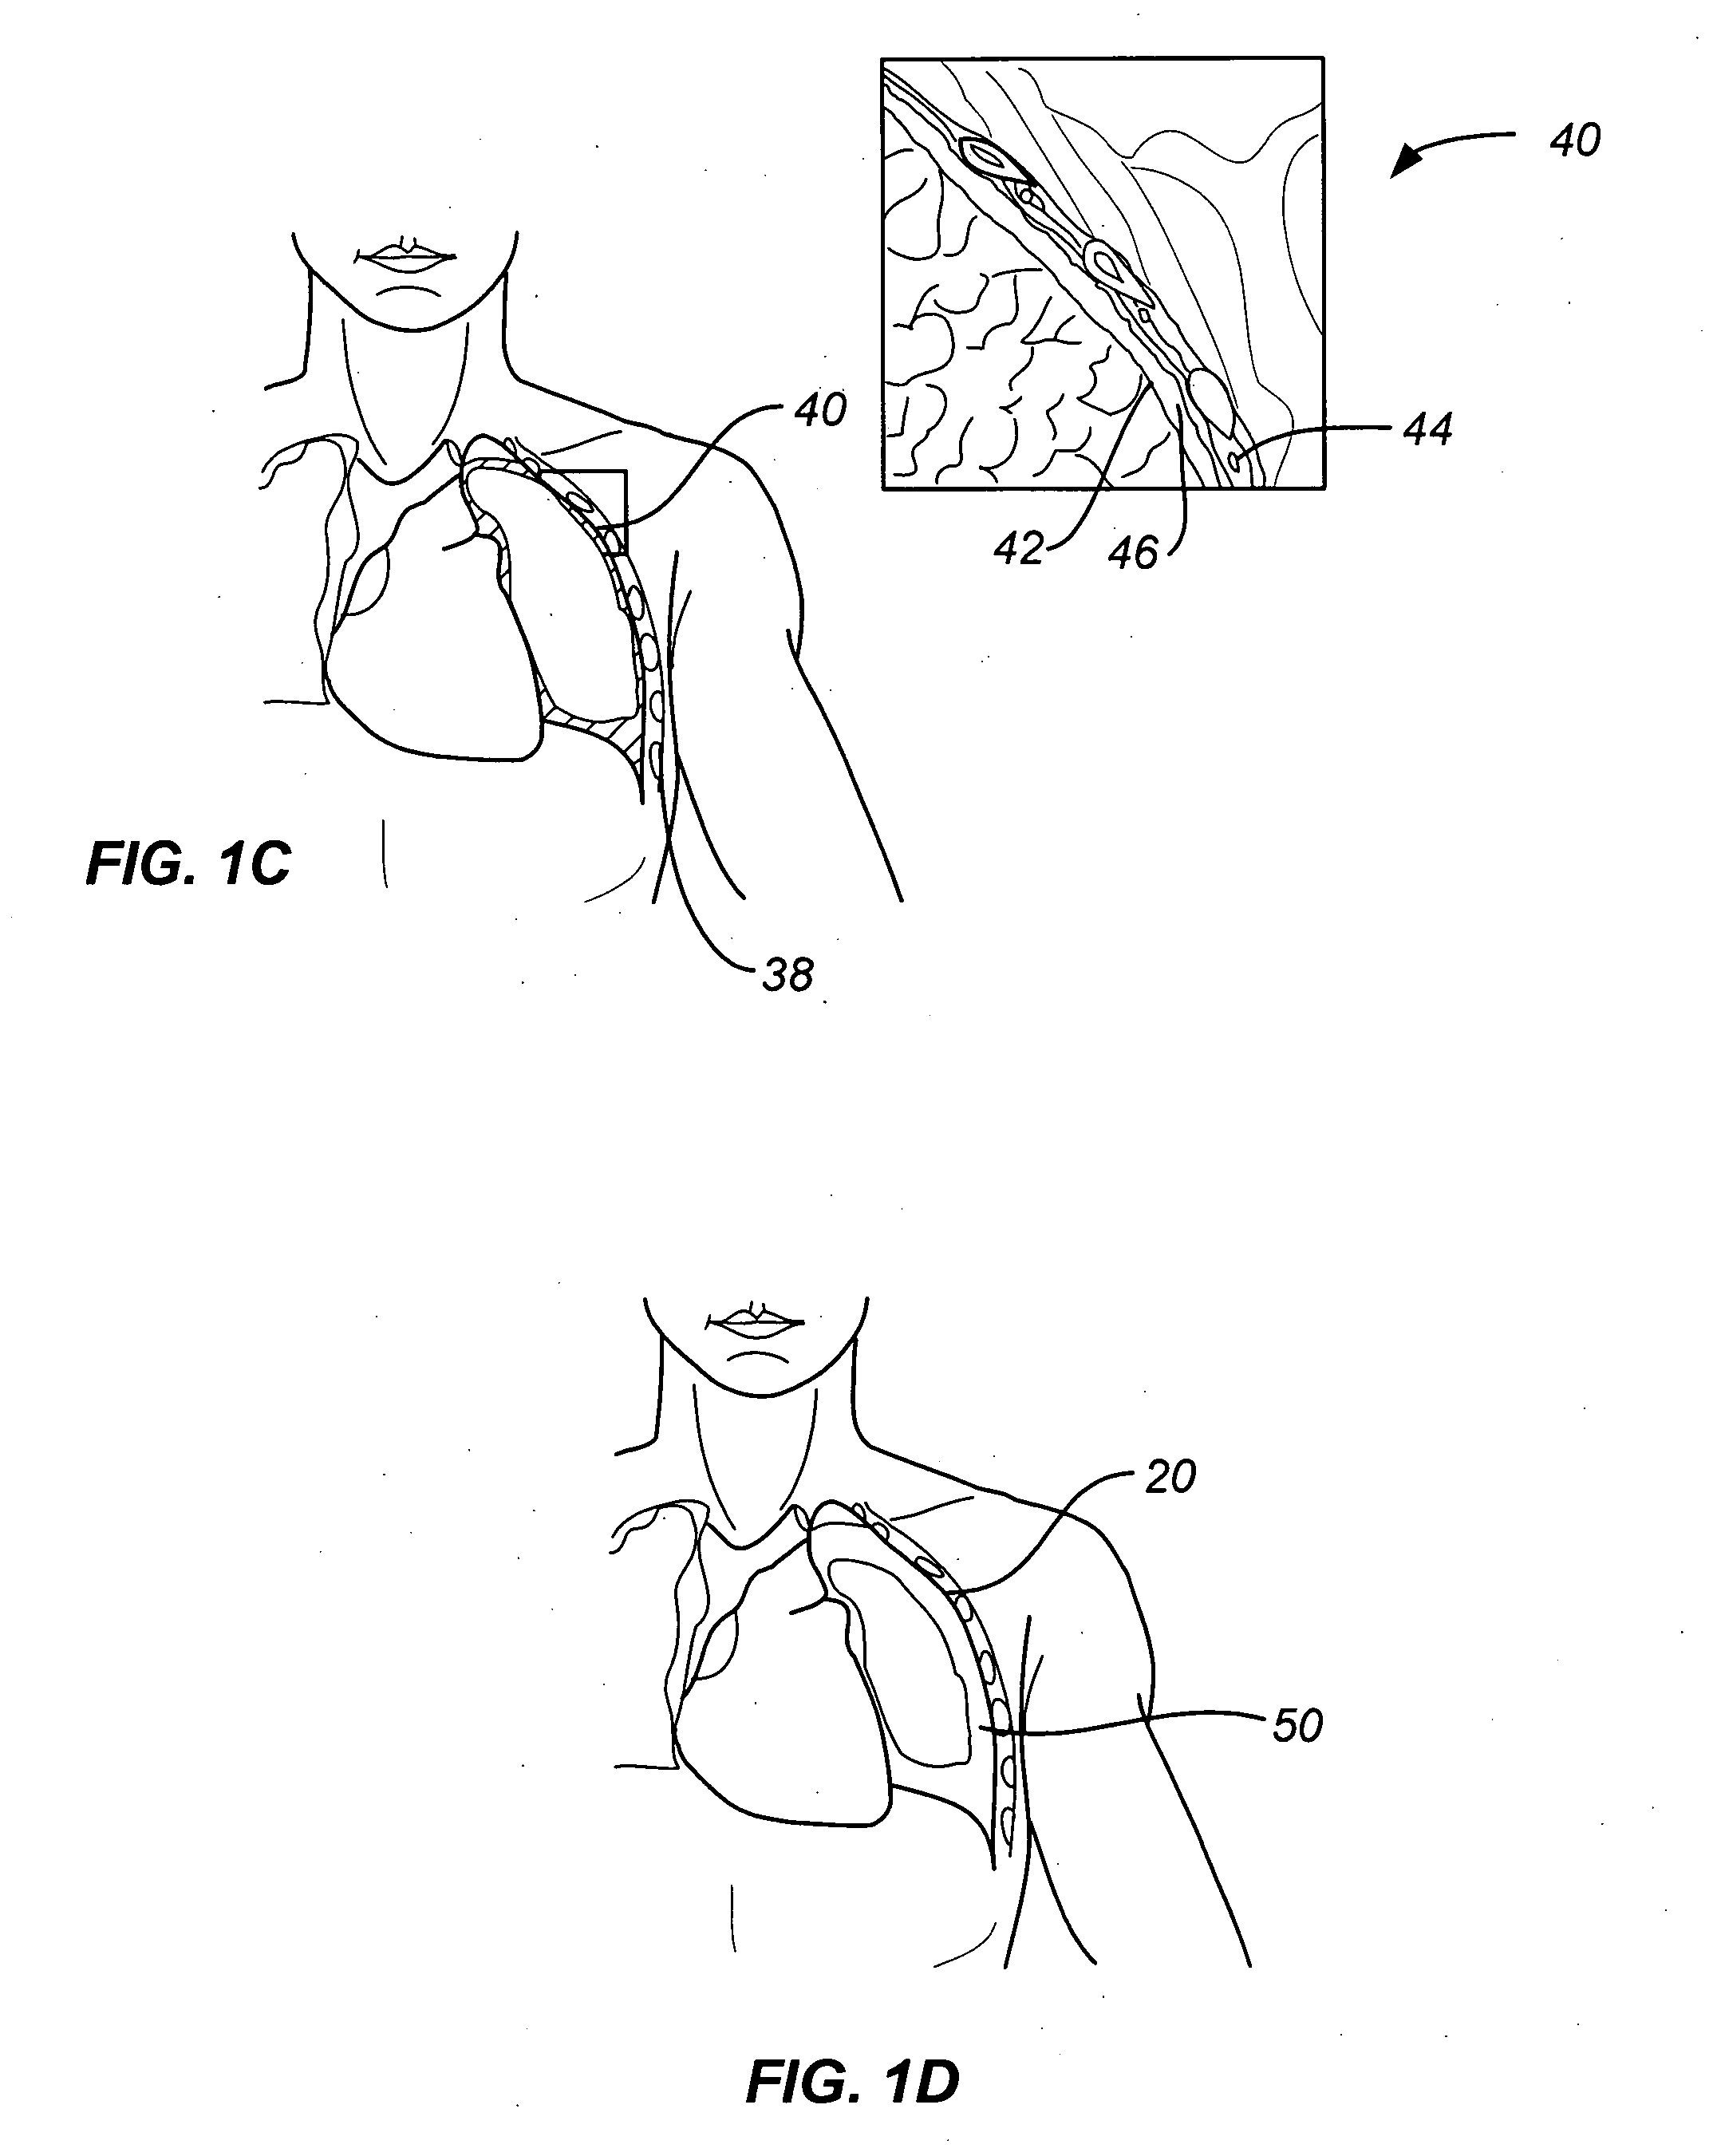 Steerable device for accessing a target site and methods